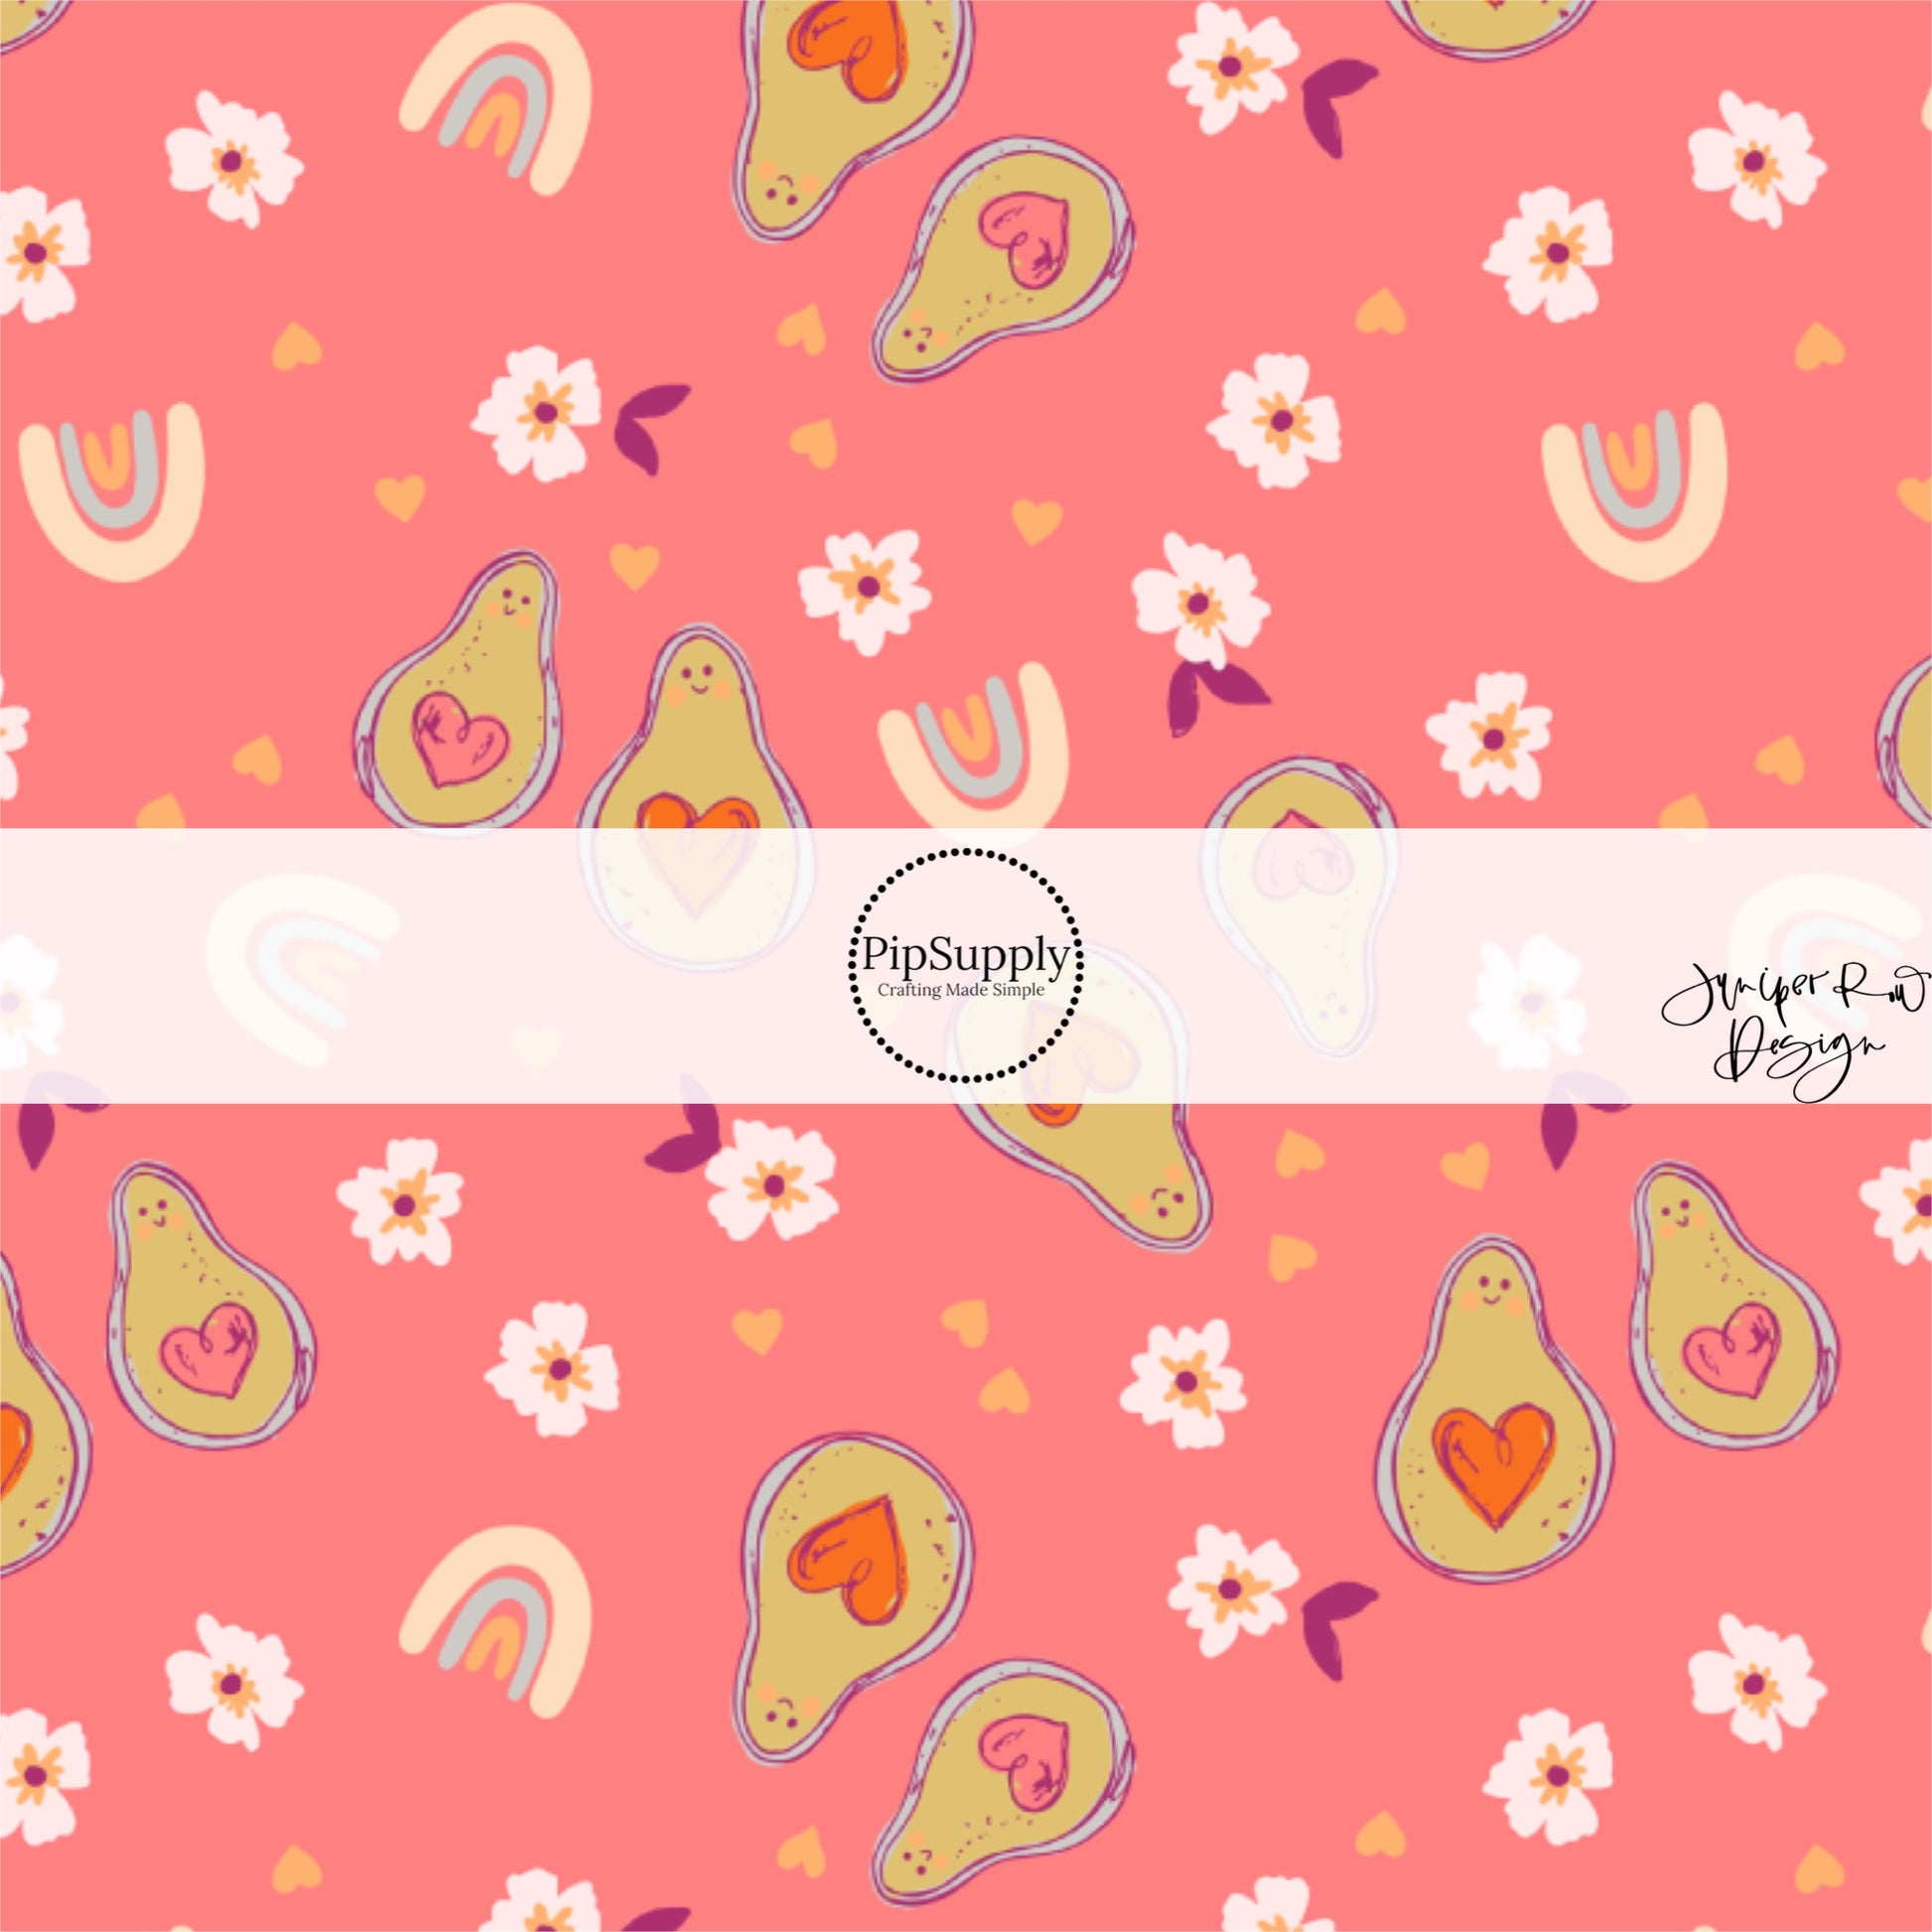 These Valentine's pattern themed fabric by the yard features avocados with hearts surrounded by flowers on pink. This fun Valentine's Day fabric can be used for all your sewing and crafting needs! 